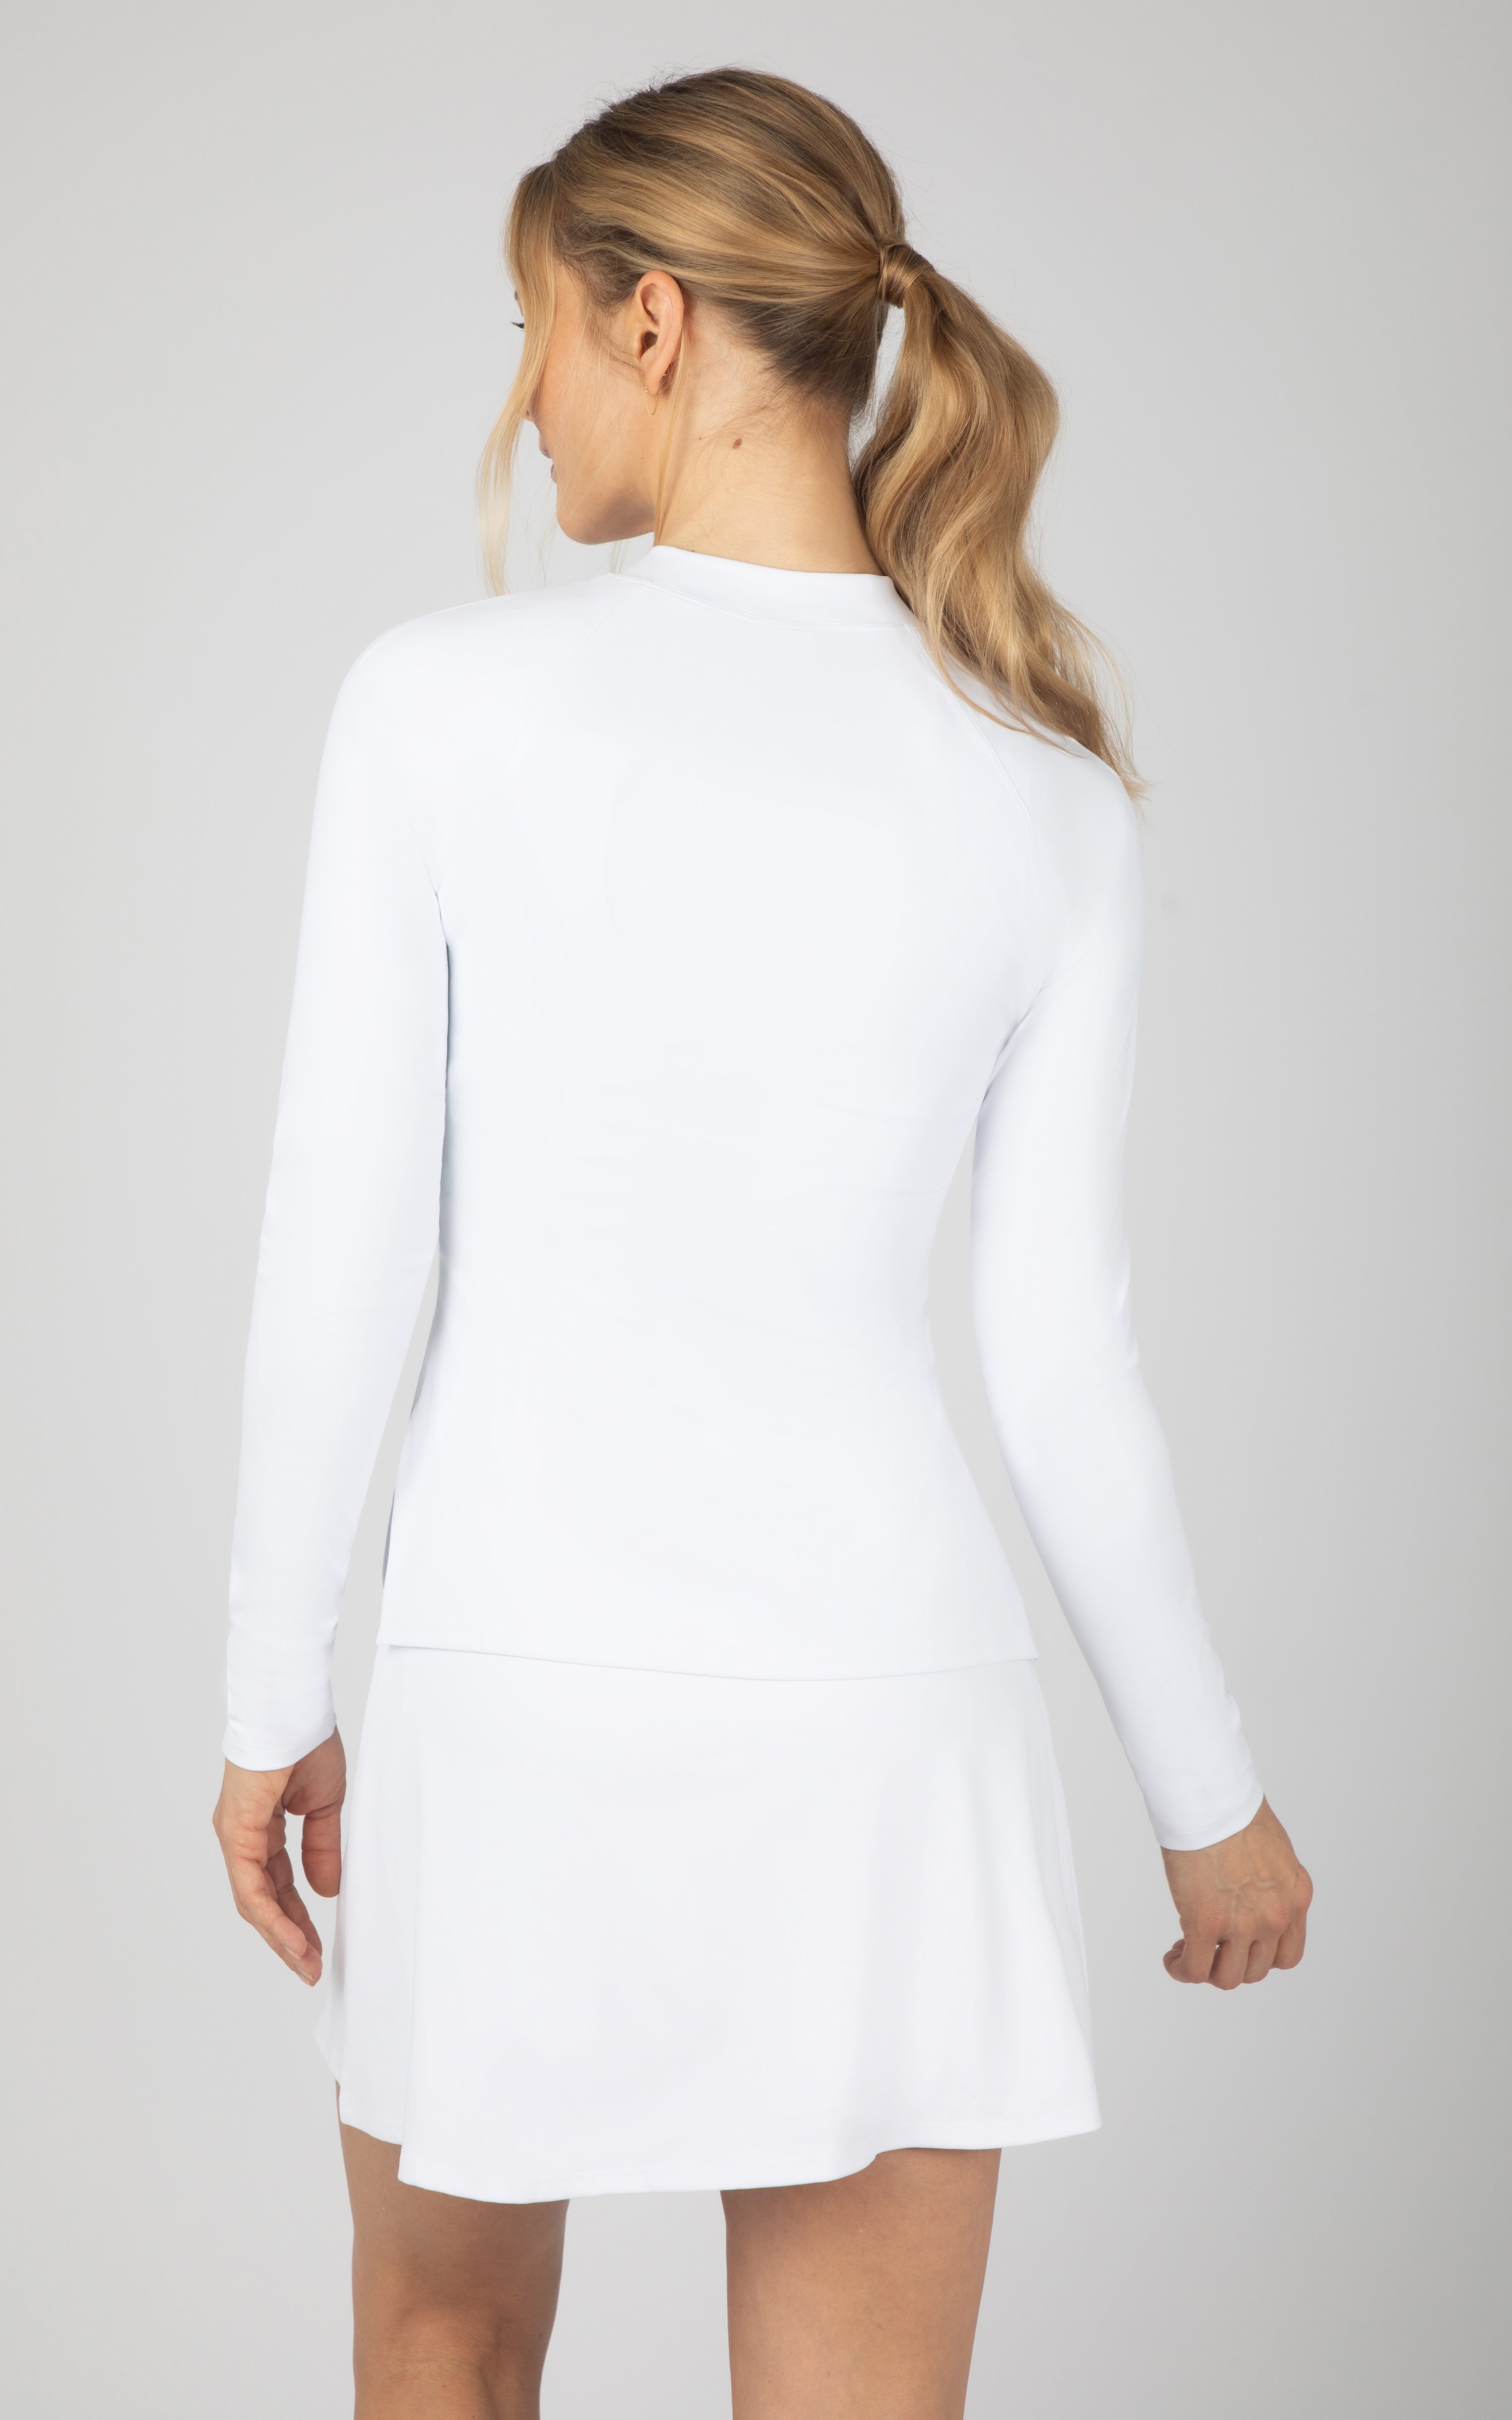 Airlux Inlet Long Sleeve UPF Top